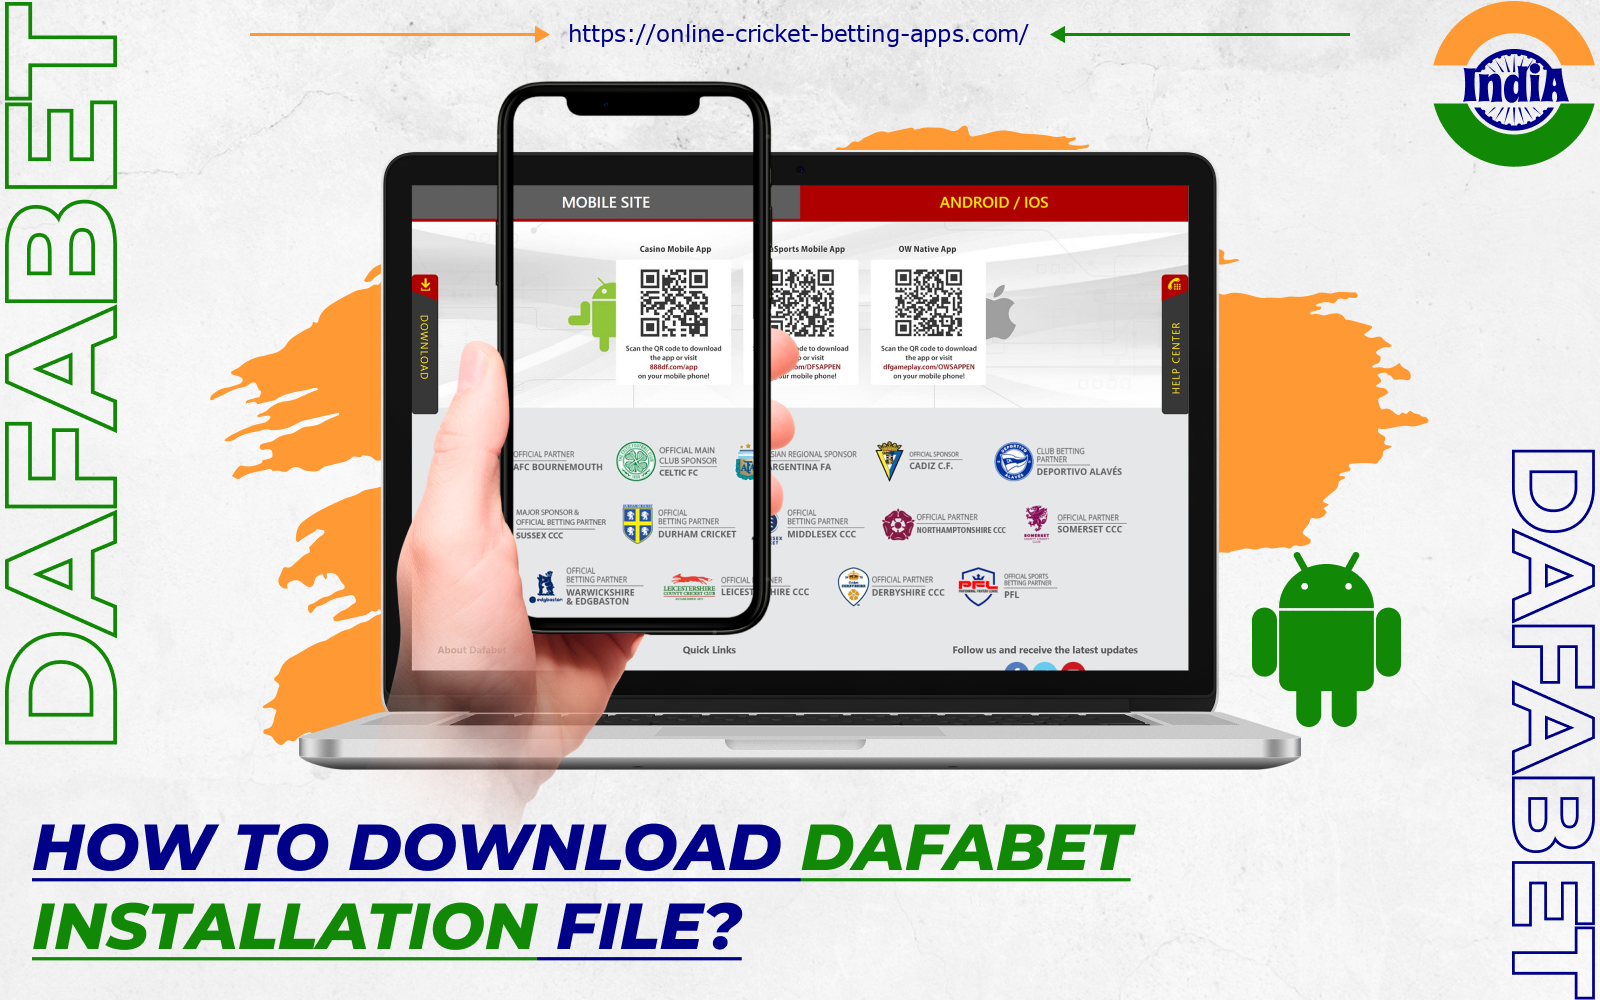 To install the Dafabet app on Android, Indians need to first download the APK file